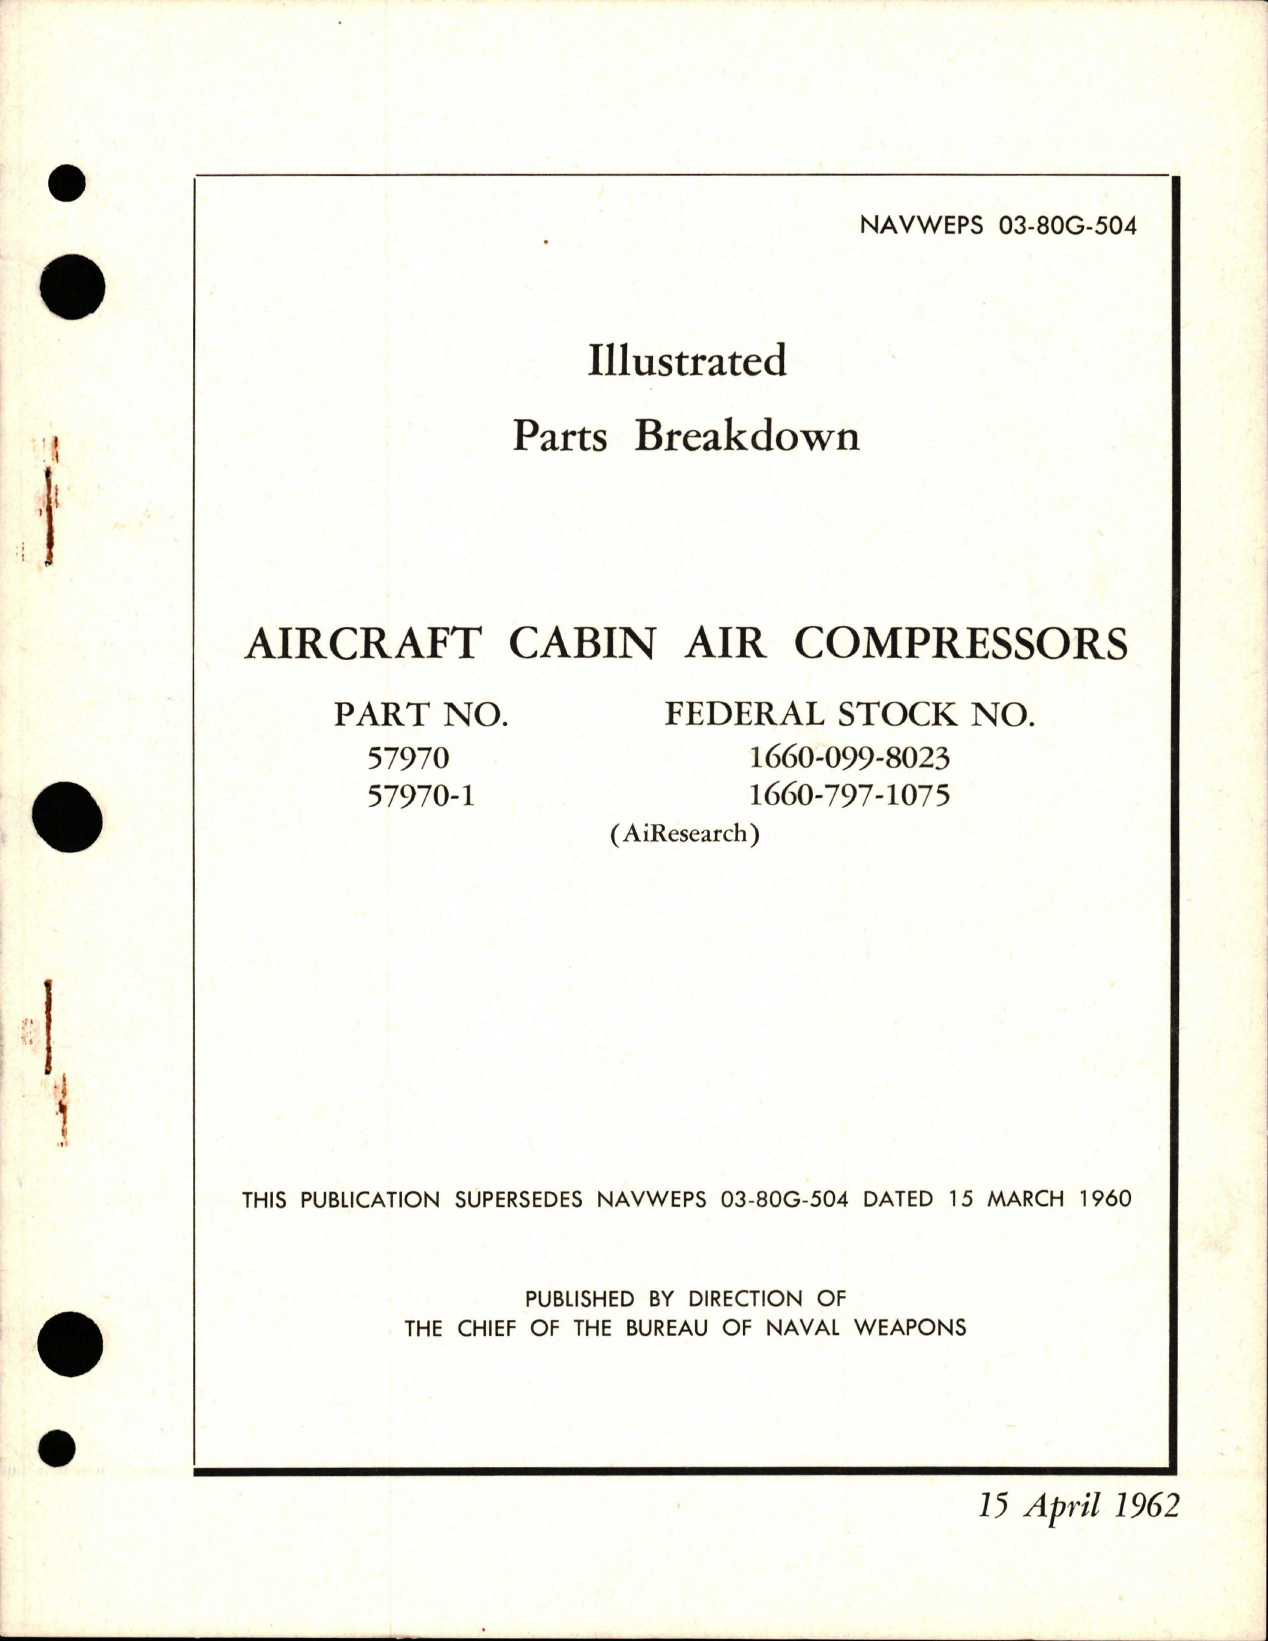 Sample page 1 from AirCorps Library document: Illustrated Parts Breakdown for Cabin Air Compressors - Parts 57970 and 57970-1